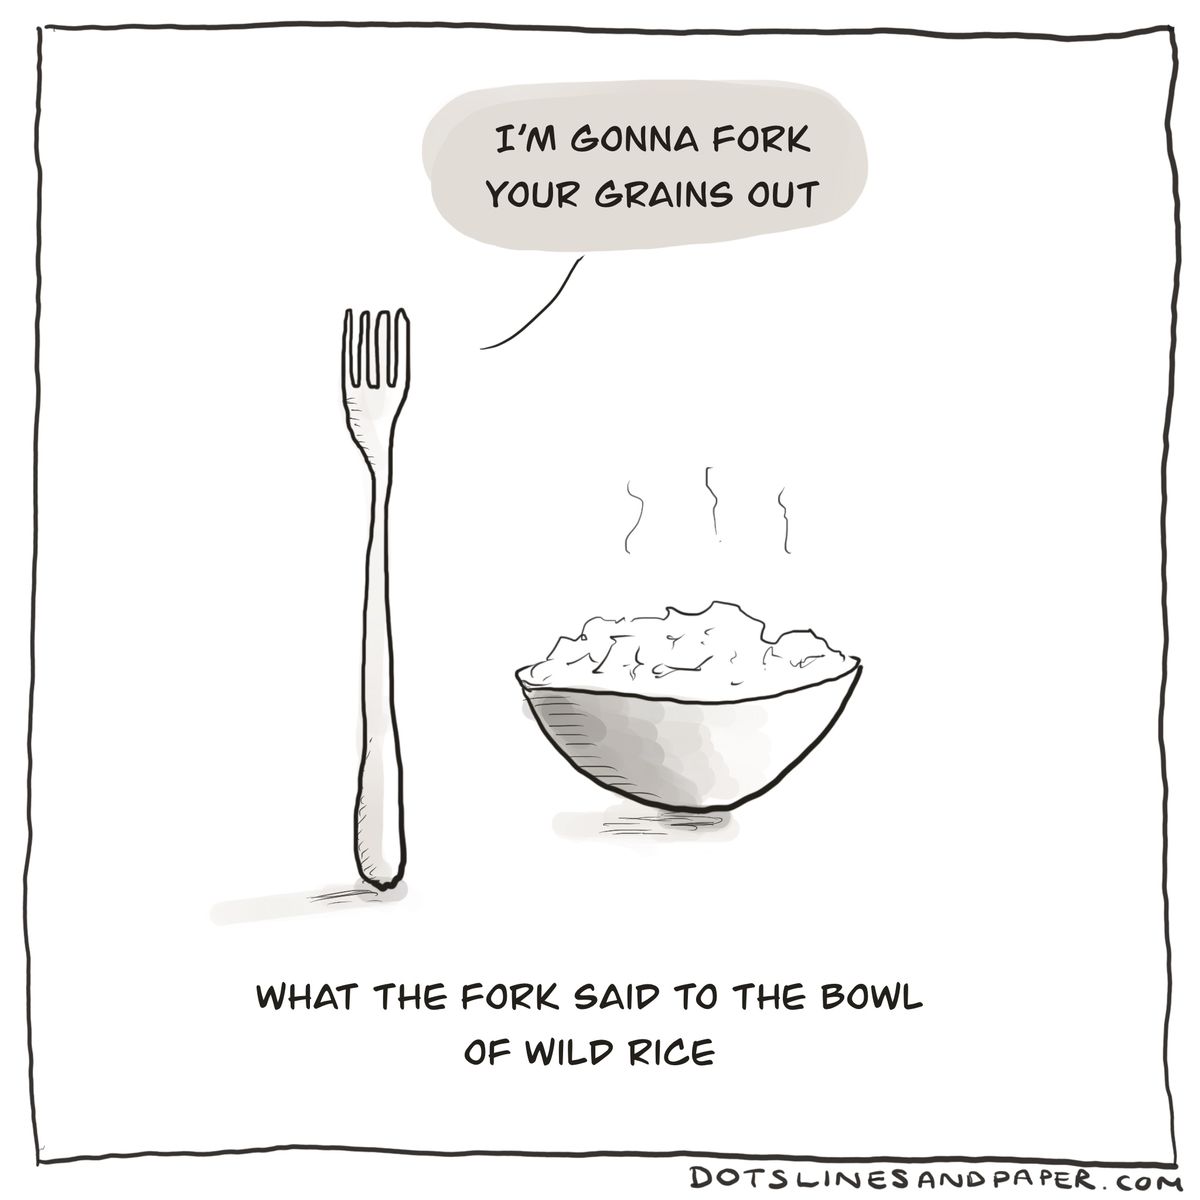 What the fork said to the bowl of wild rice